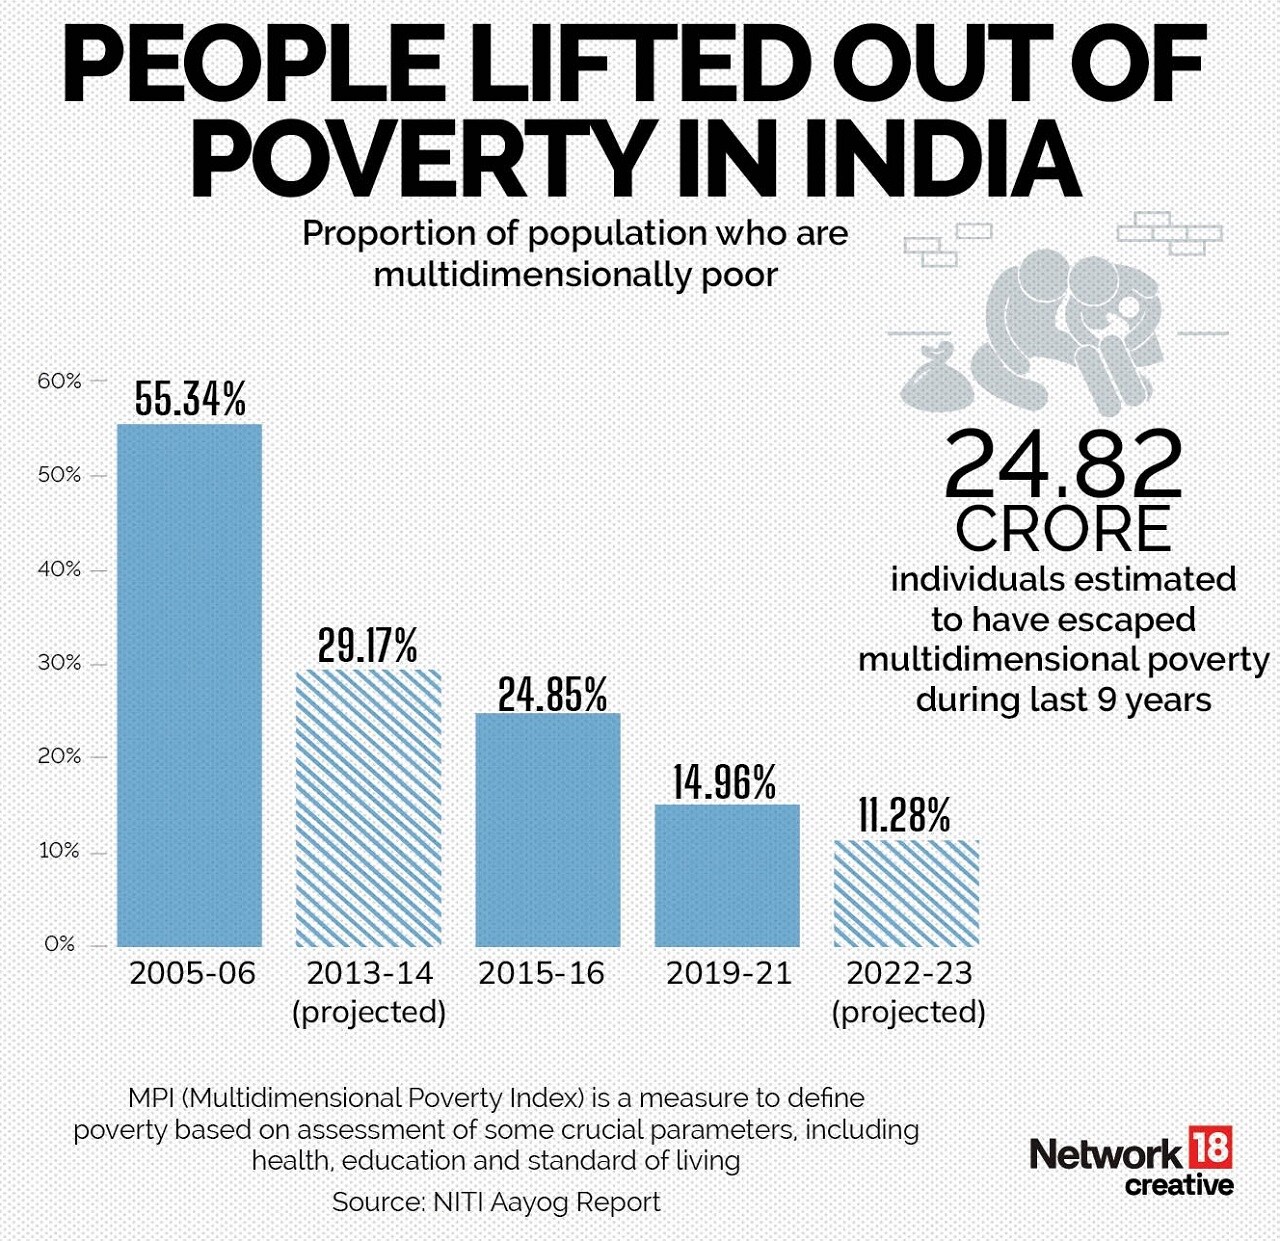 31% of India's population now classifies as middle class, earning between ₹5 lakh and ₹30 lakh a year. This pool of consumers is expected to be 38% of India's population by 2031.